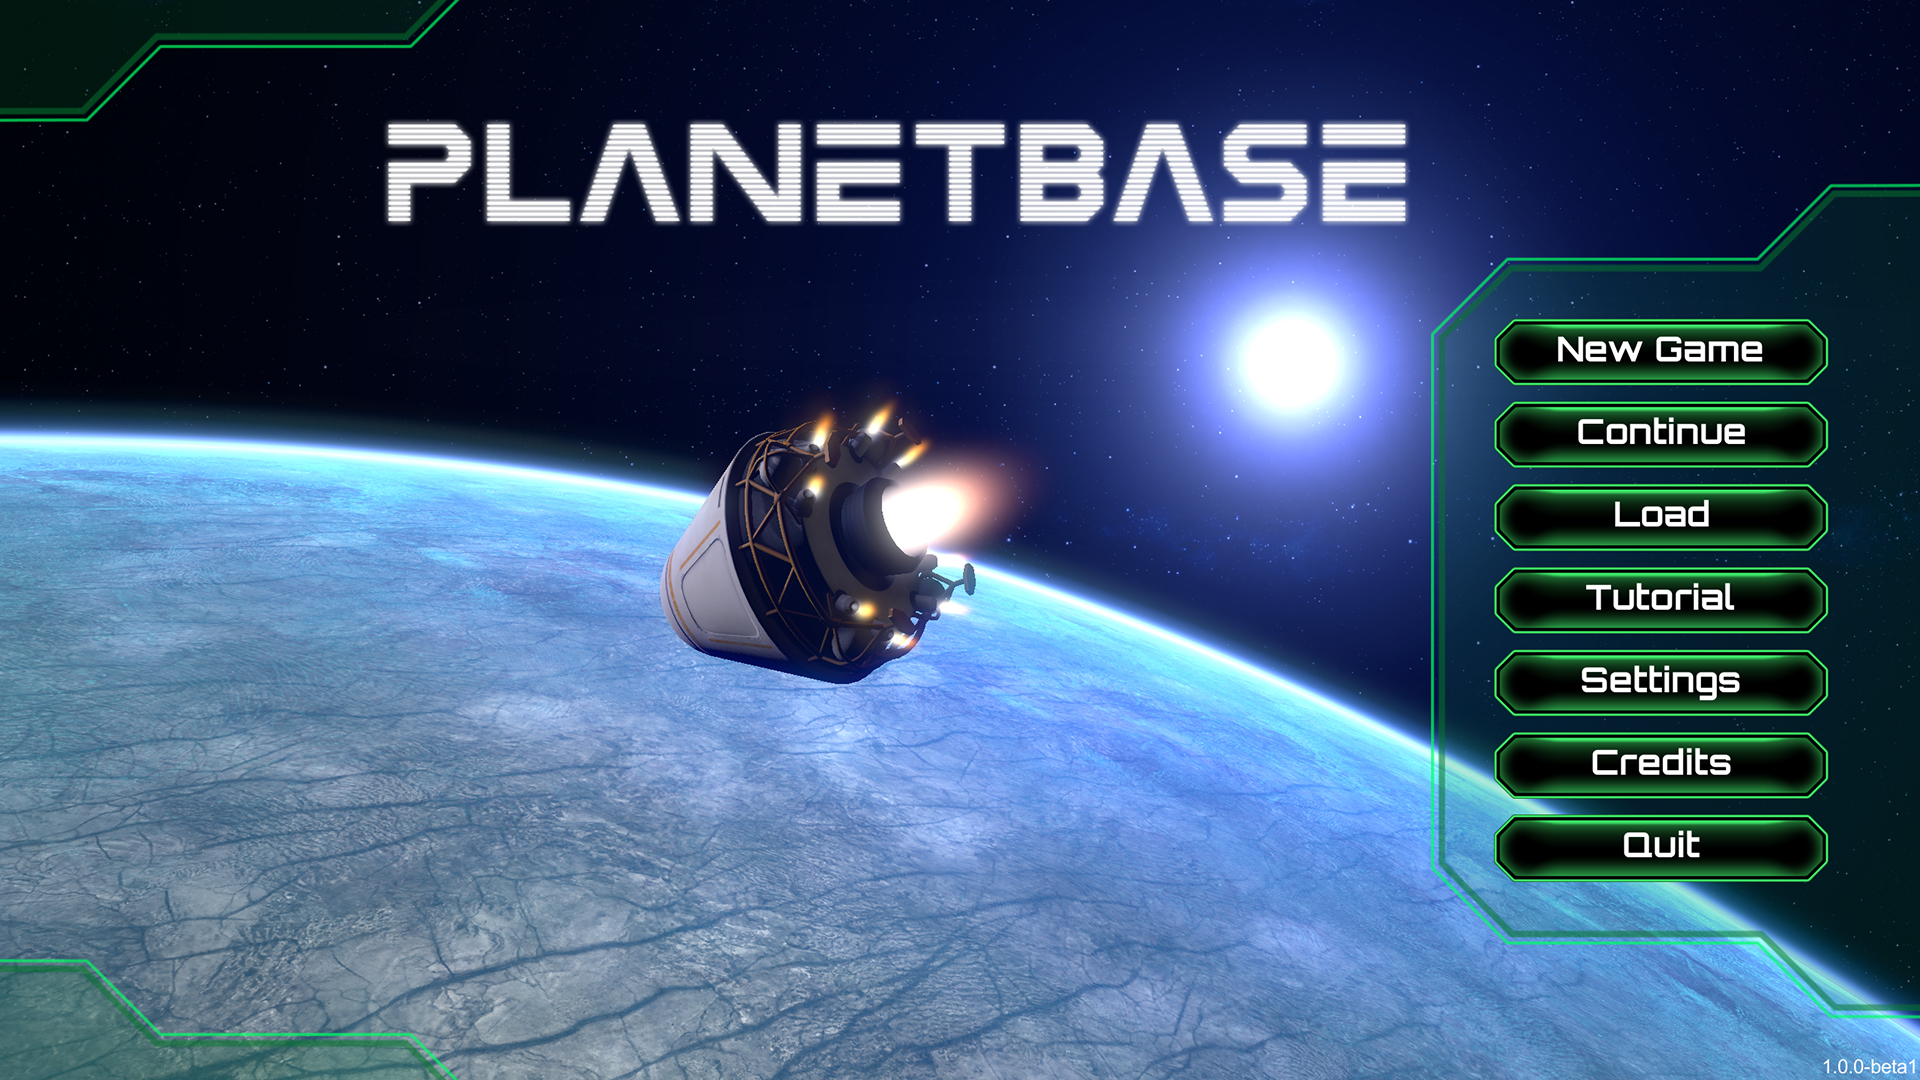 Save 50% on Planetbase on Steam